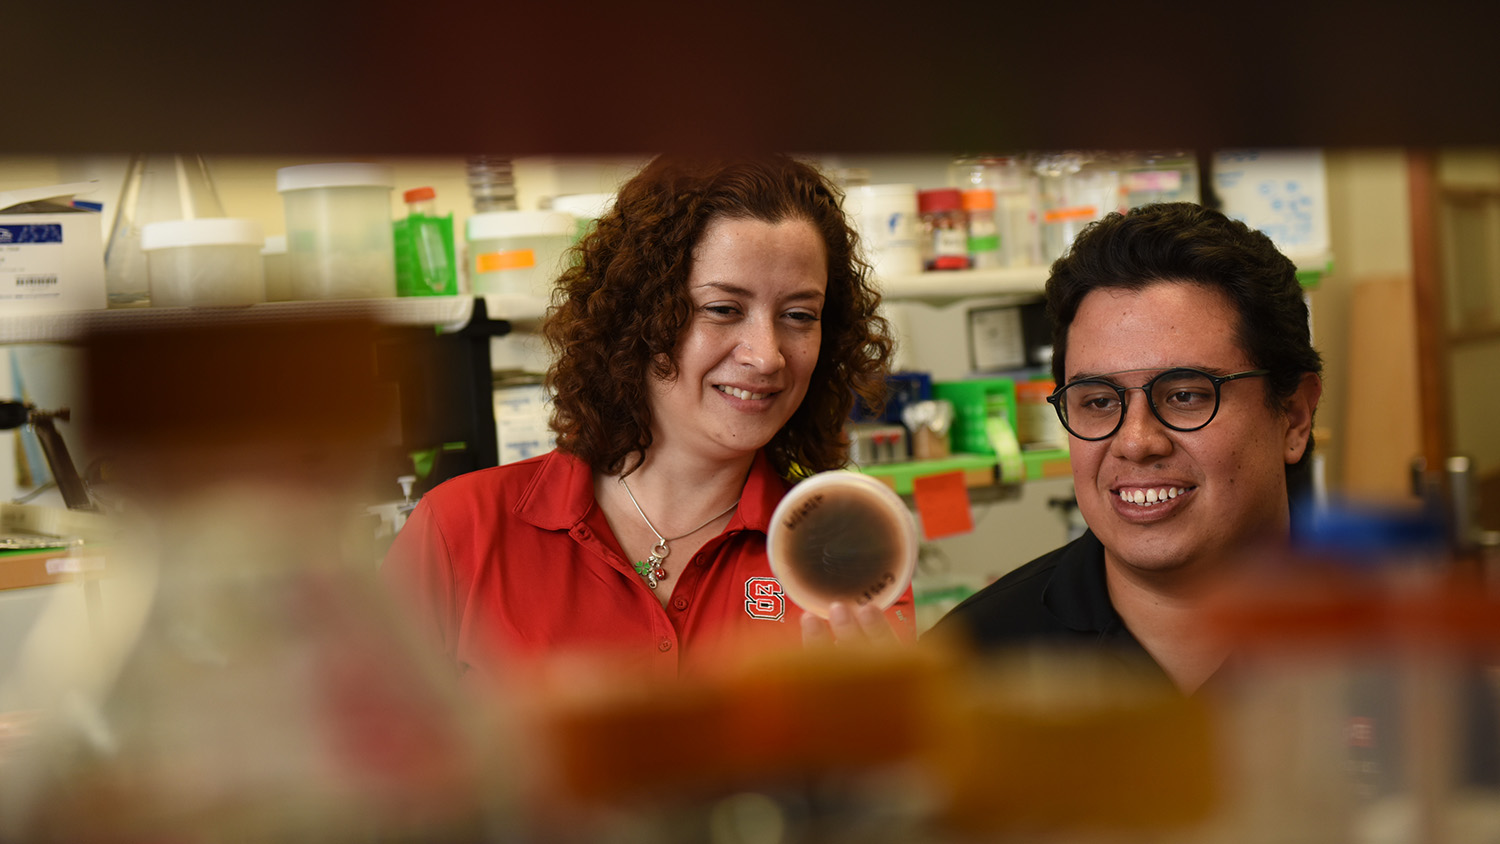 Ph.D. candidate Camilo H. Parada Rojas, right, works in the lab with mentor Lina Quesada-Ocampo, Ph.D.